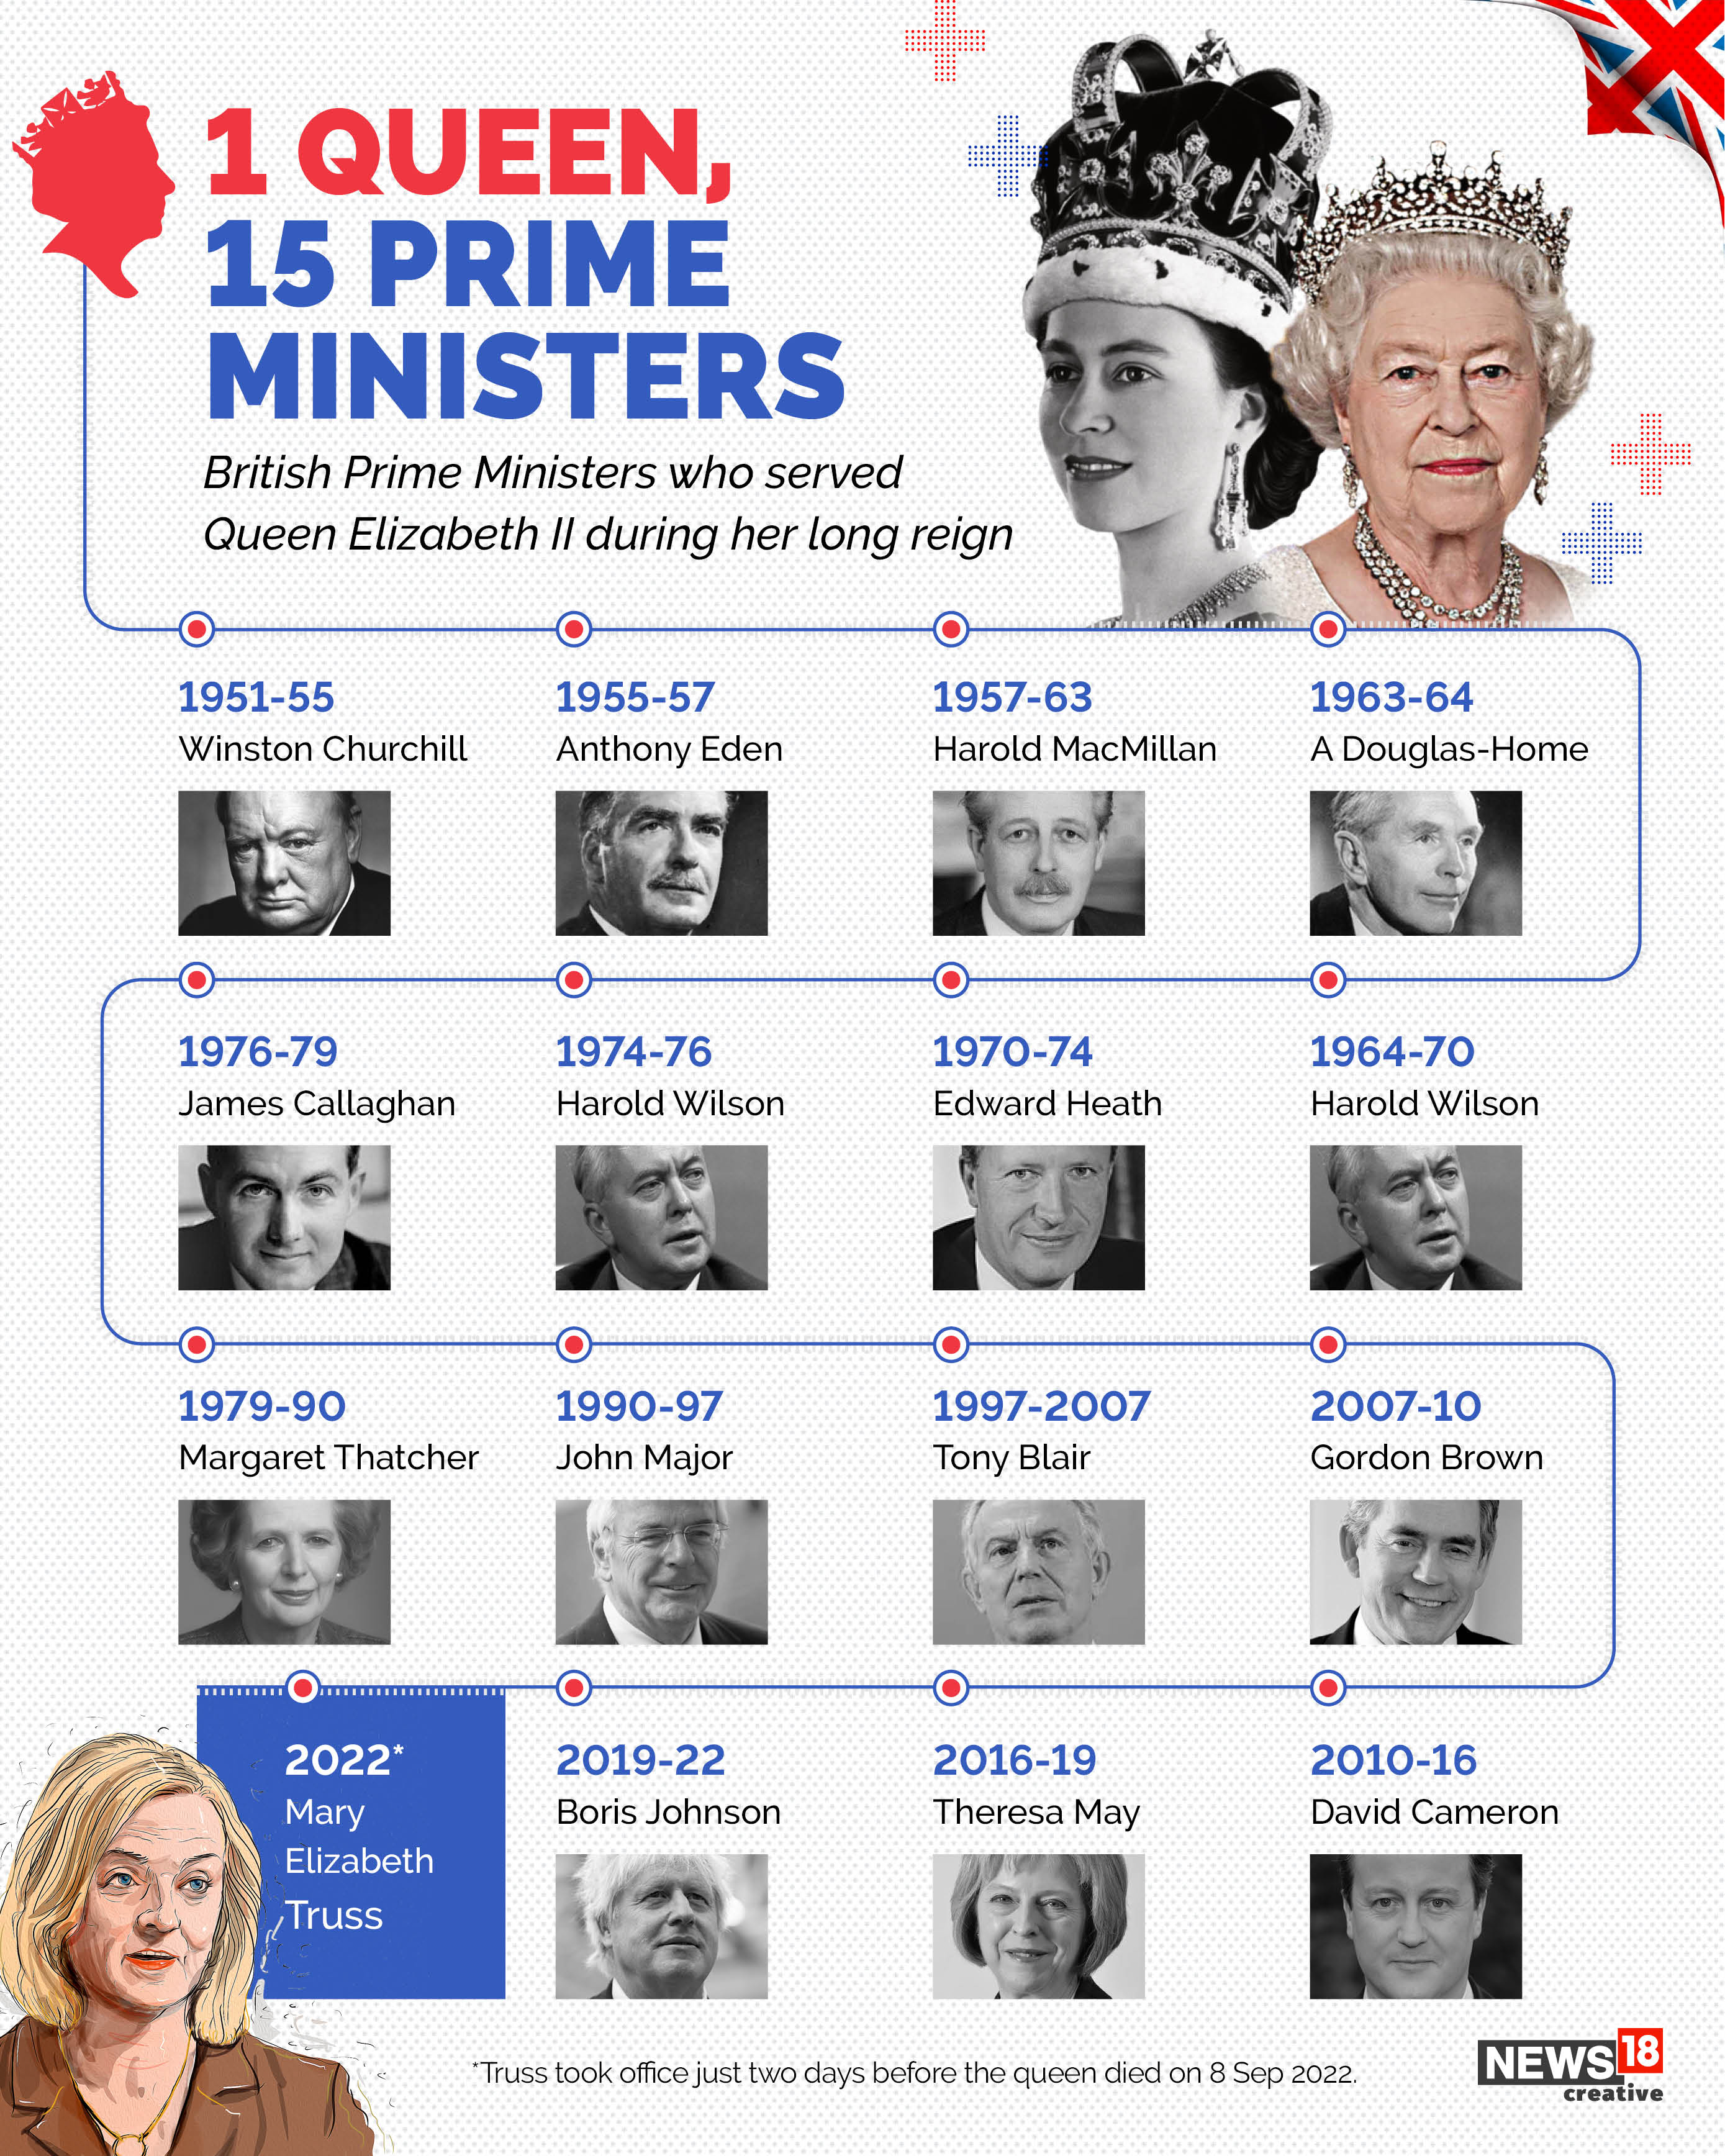 1 queen 15 prime ministers 2 1